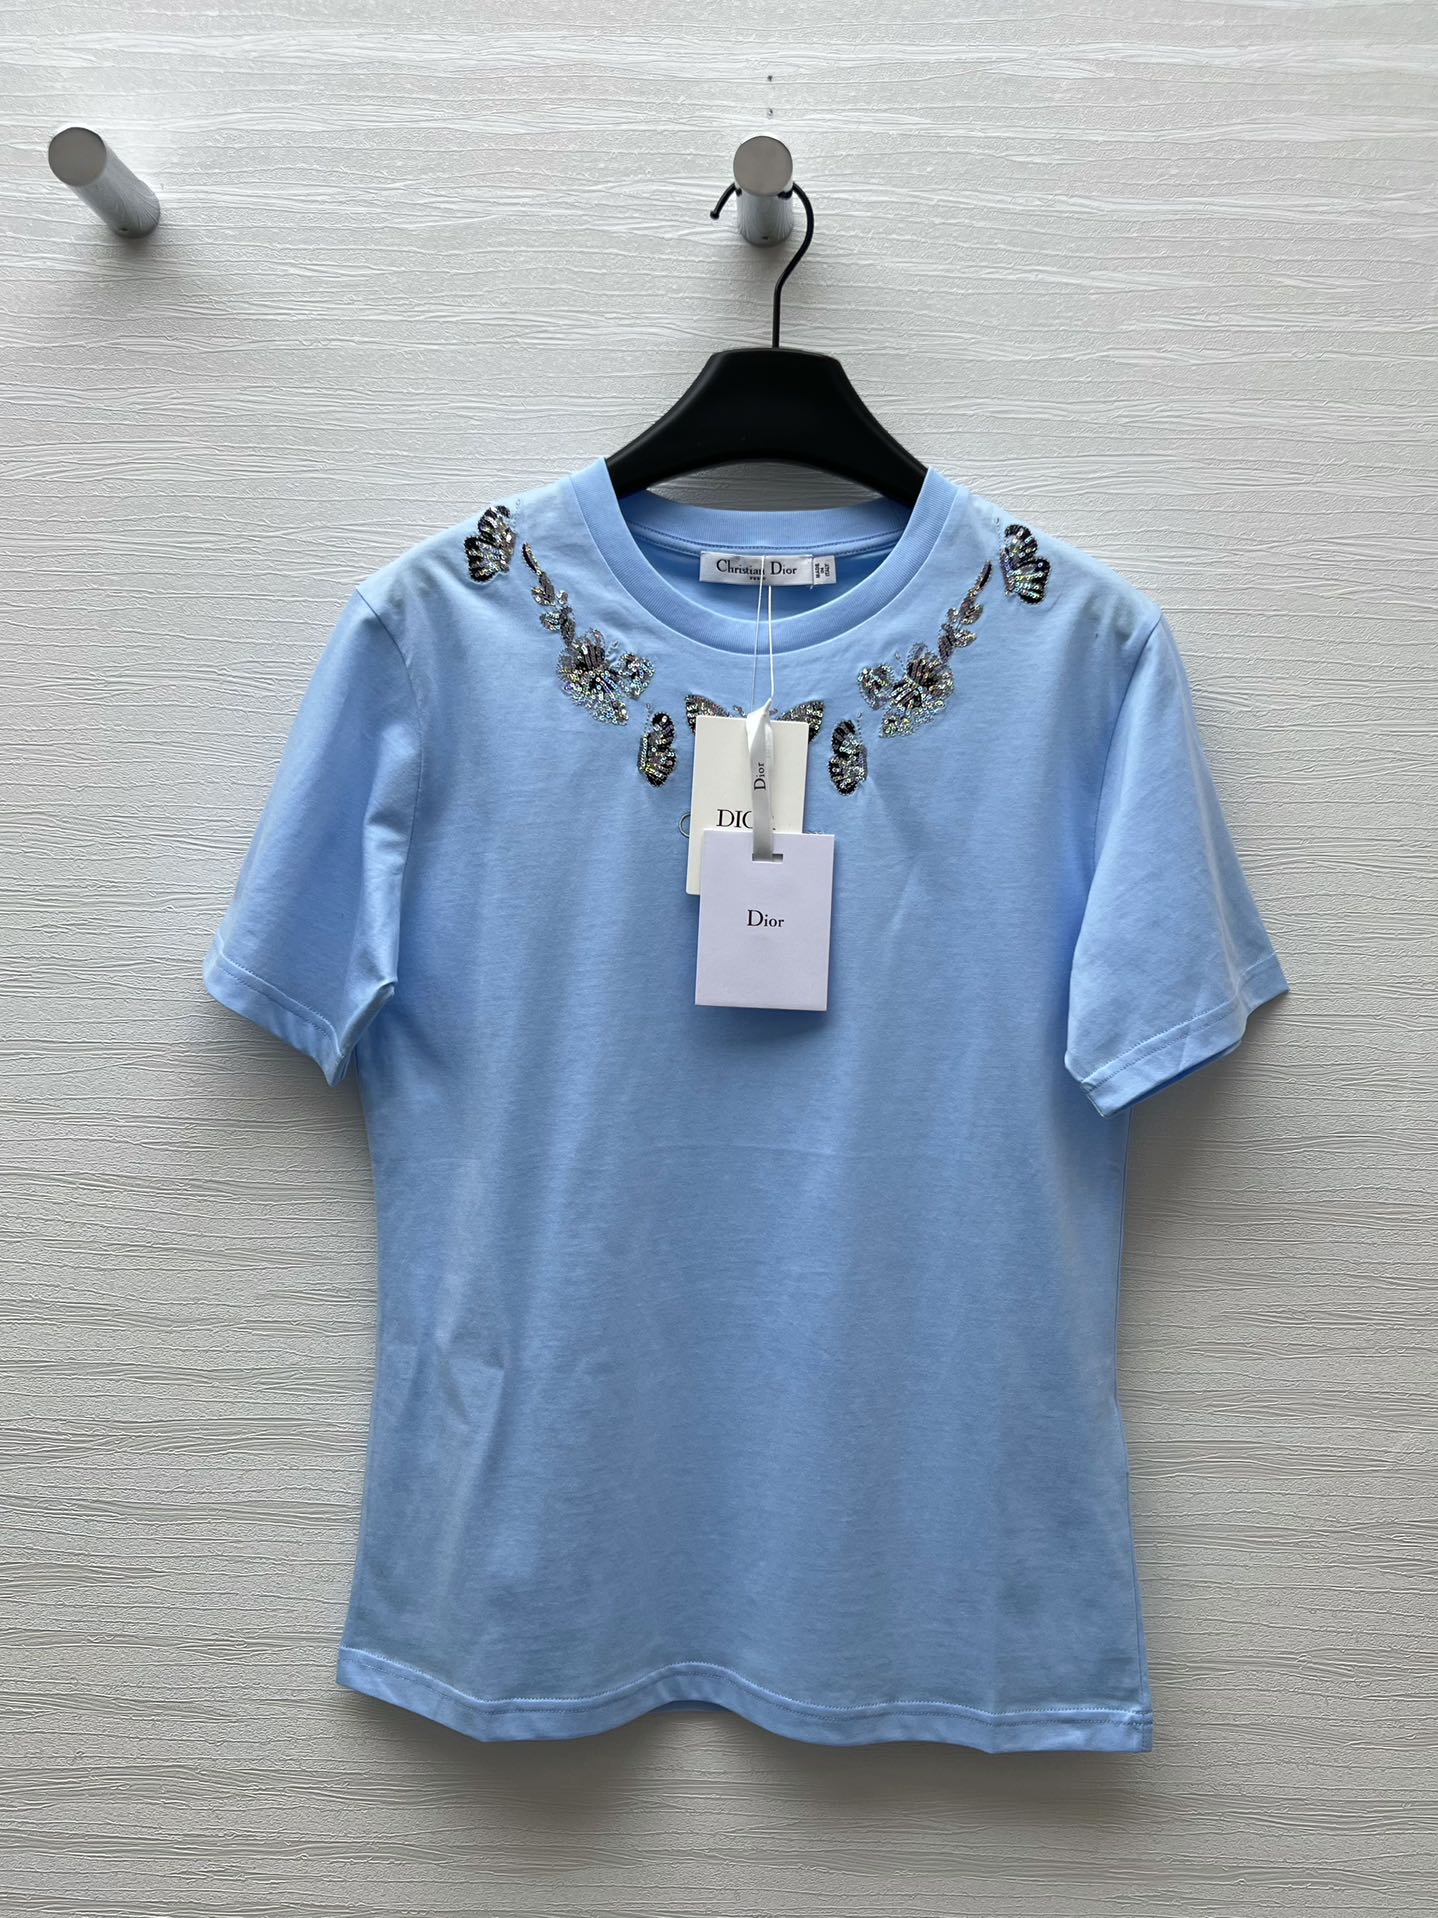 Dior Clothing T-Shirt Buy Cheap
 Embroidery Spring/Summer Collection Short Sleeve